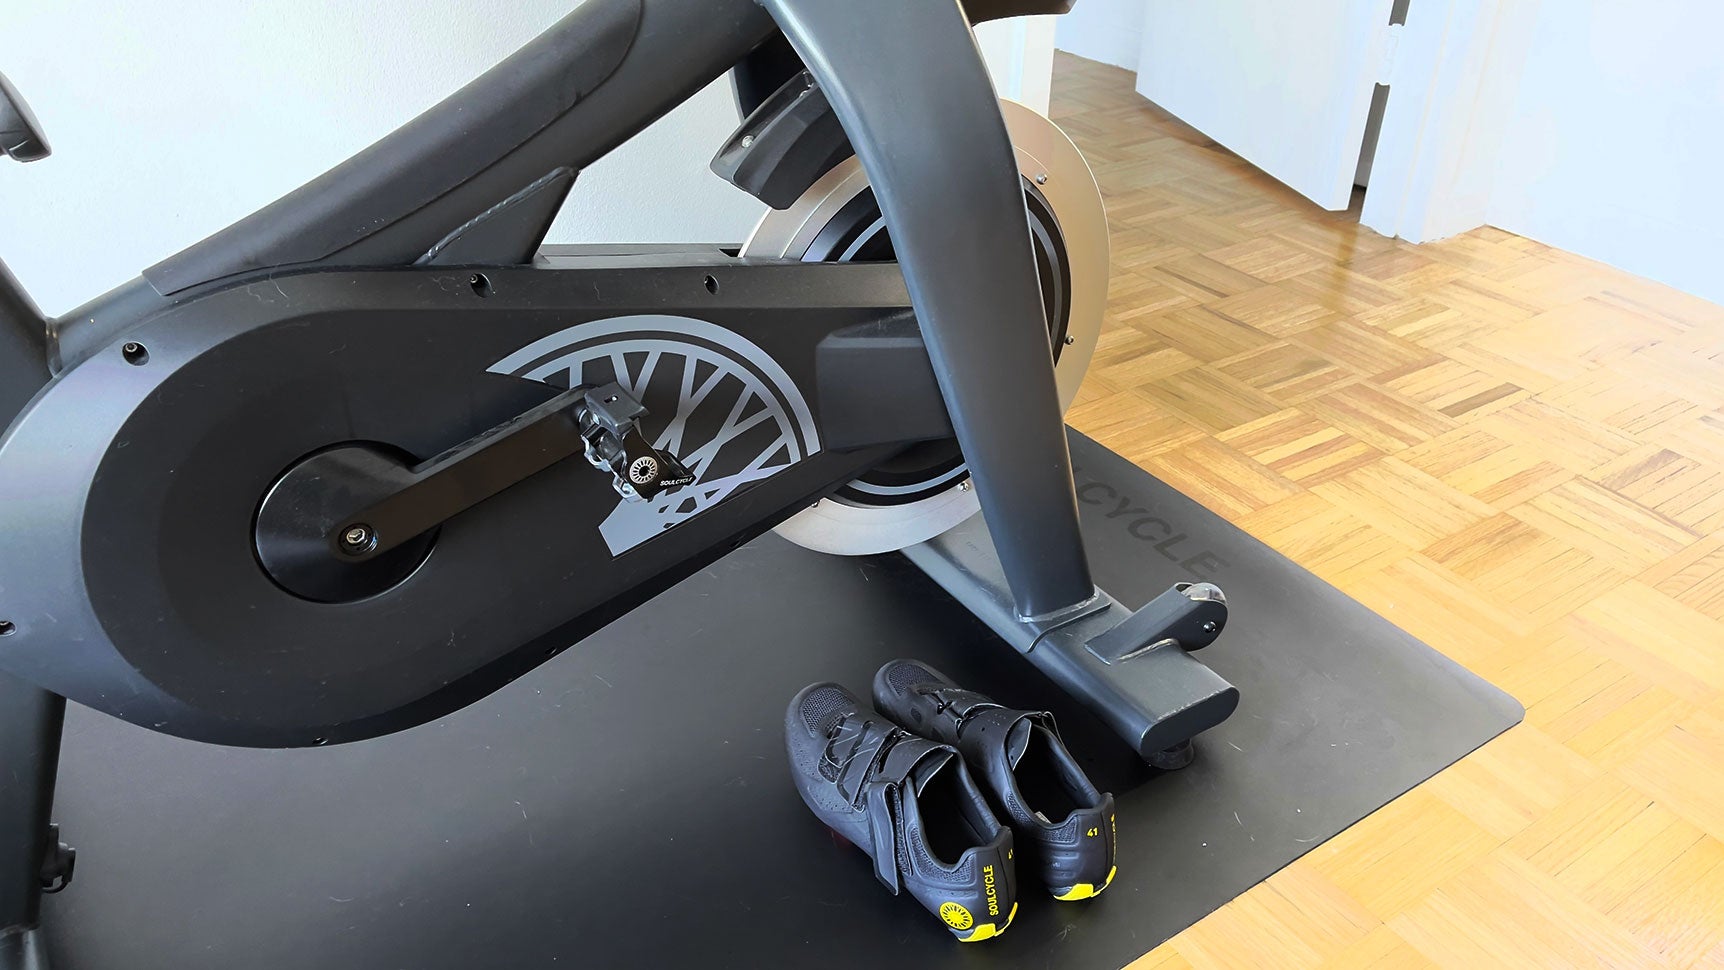 The shoes, mat, and weights will cost you extra but make the experience better. Though, all you really need are clip-in shoes. (Photo: Victoria Song/Gizmodo)